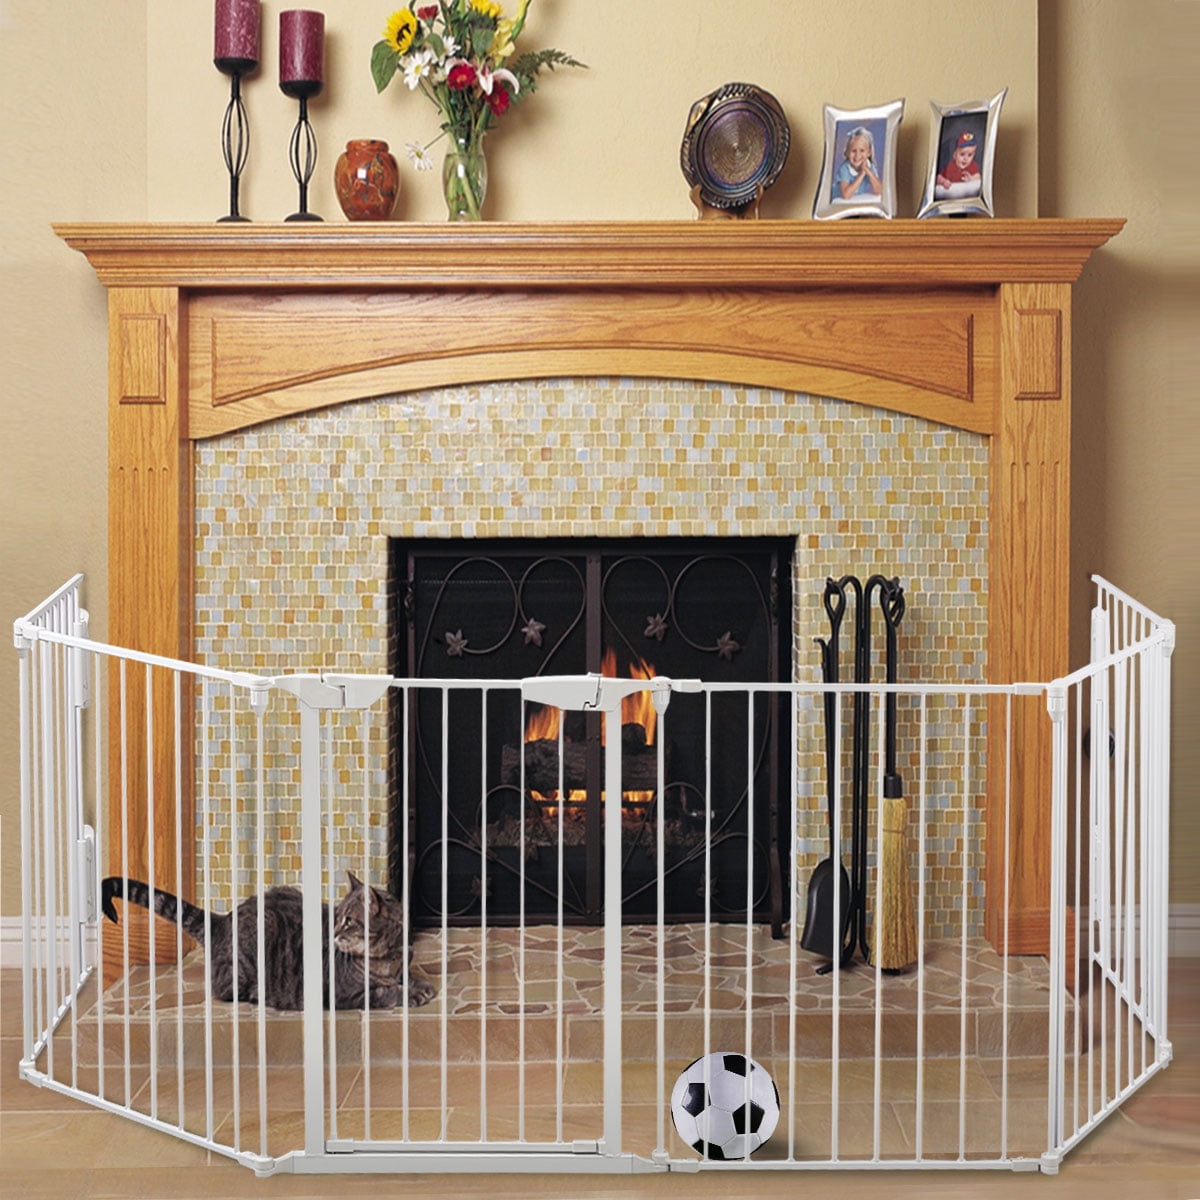 Fireplace Fence Baby Pet Dog Cat Safety Fence BBQ Hearth Gate Metal Fire Gate 